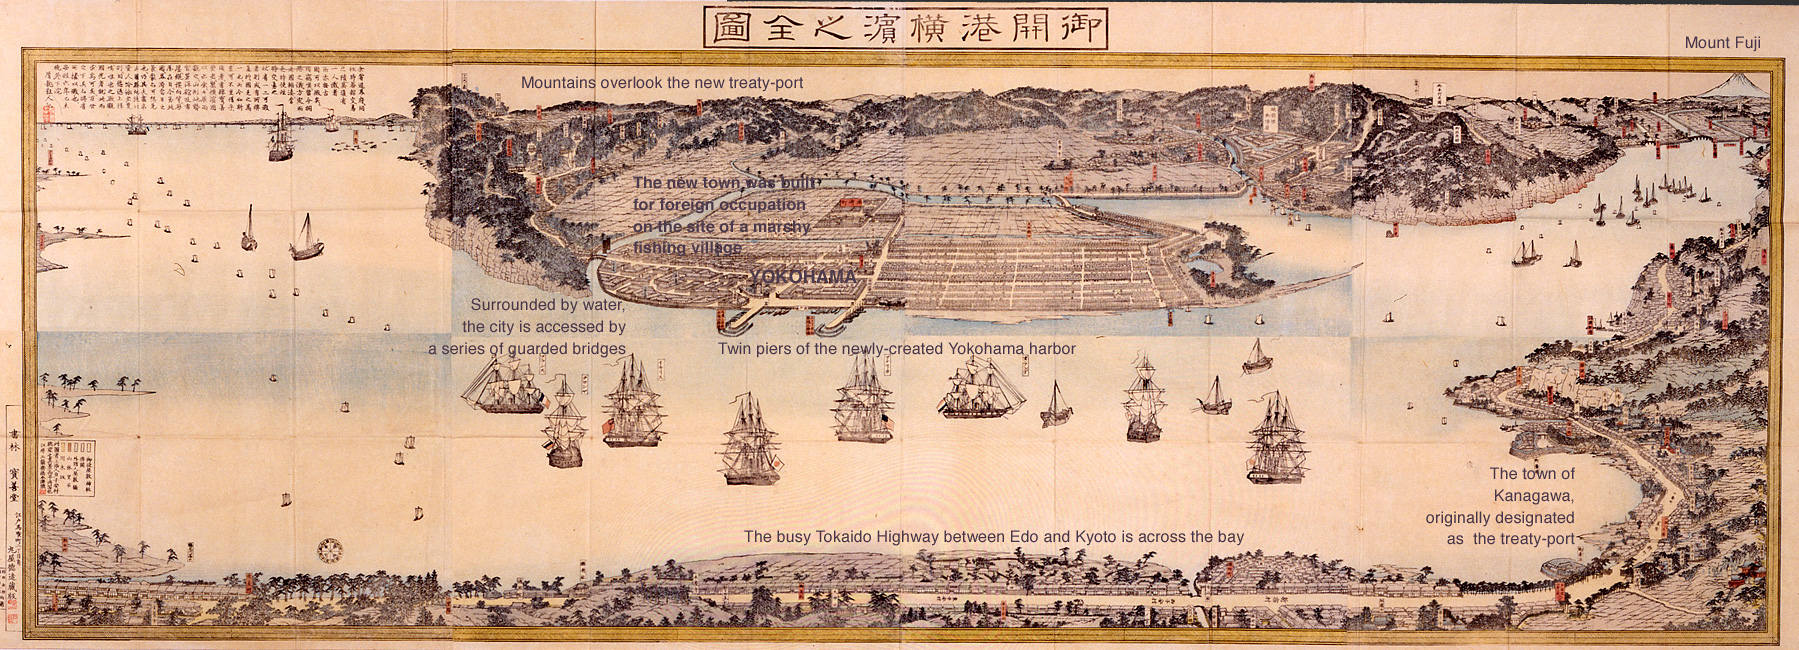 “Complete Picture of the Newly Opened Port of Yokohama”by Sadahide, 1859-60